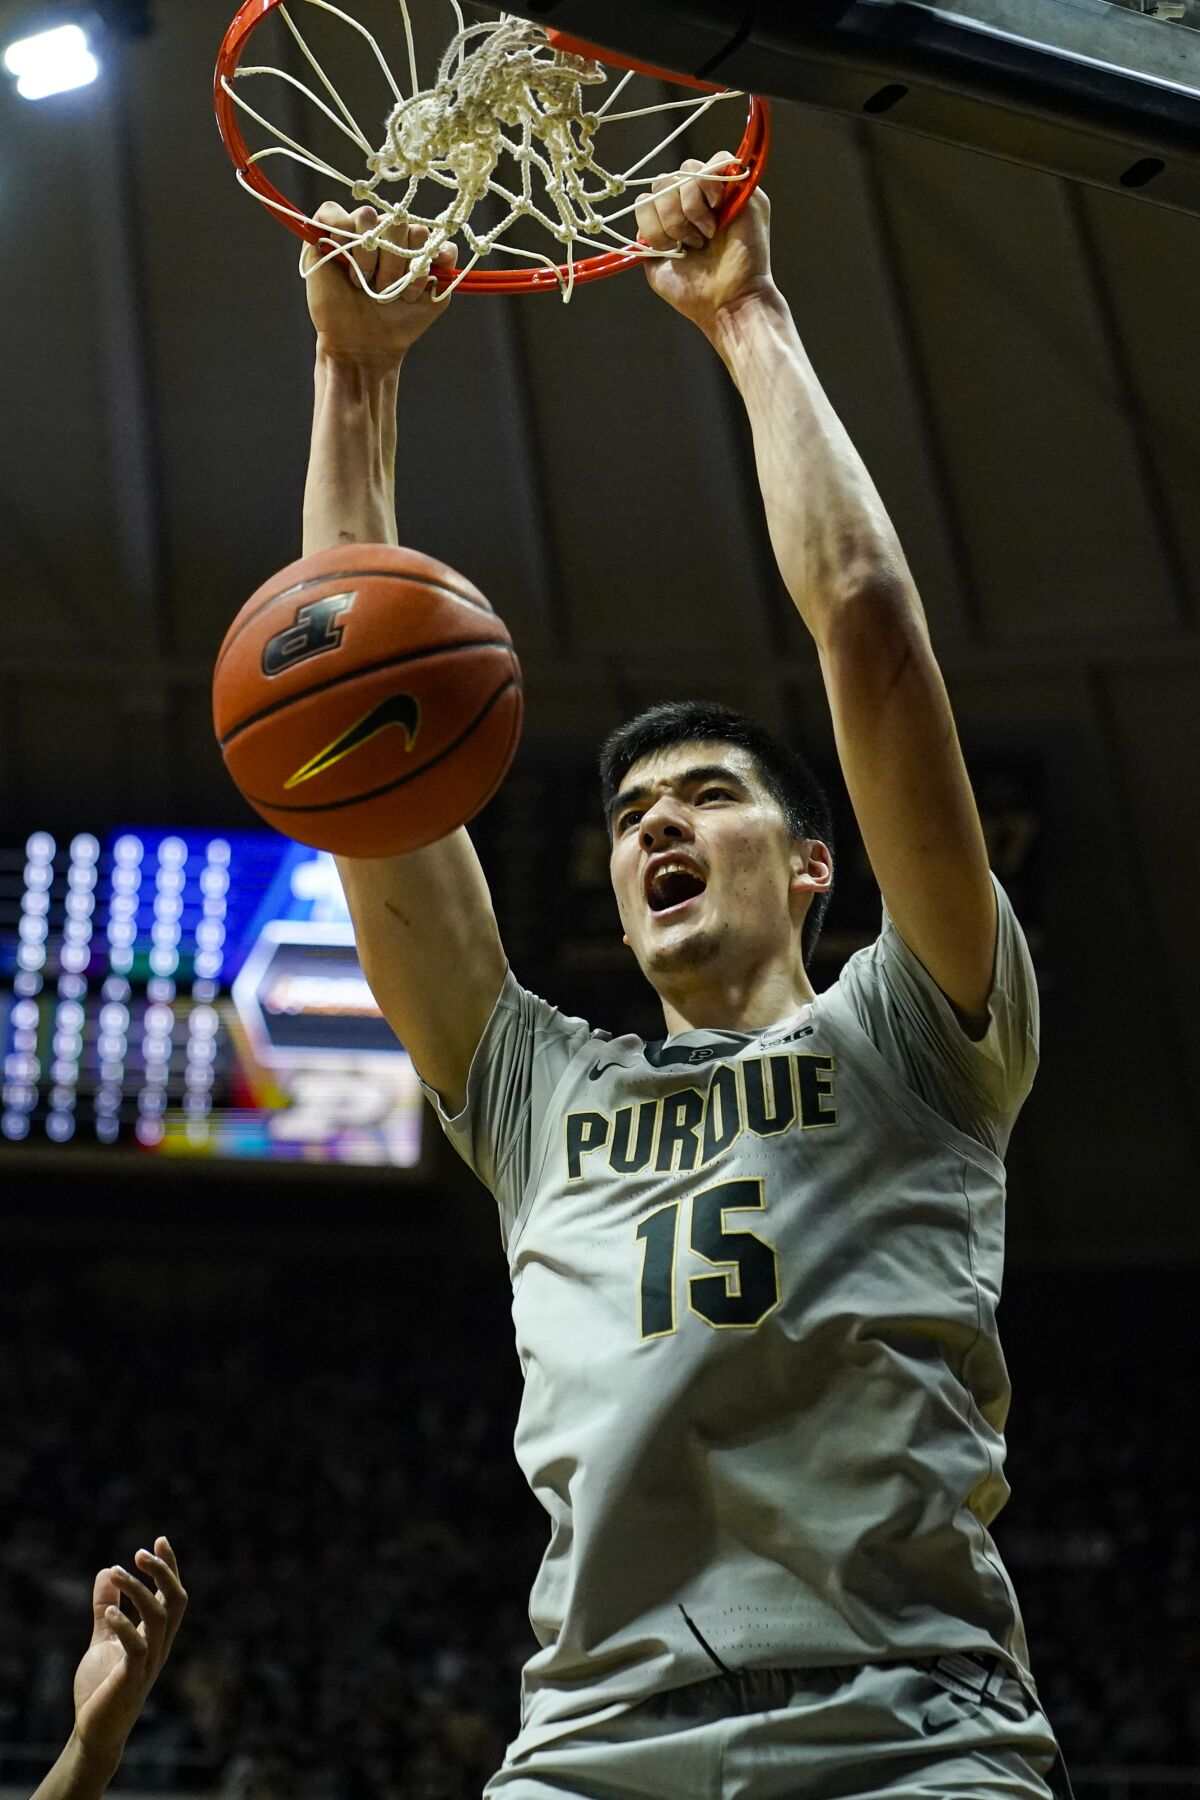 Purdue center Zach Edey (15) reacts after a dunk against Indiana State during the first half of an NCAA college basketball game in West Lafayette, Ind., Friday, Nov. 12, 2021. (AP Photo/Michael Conroy)